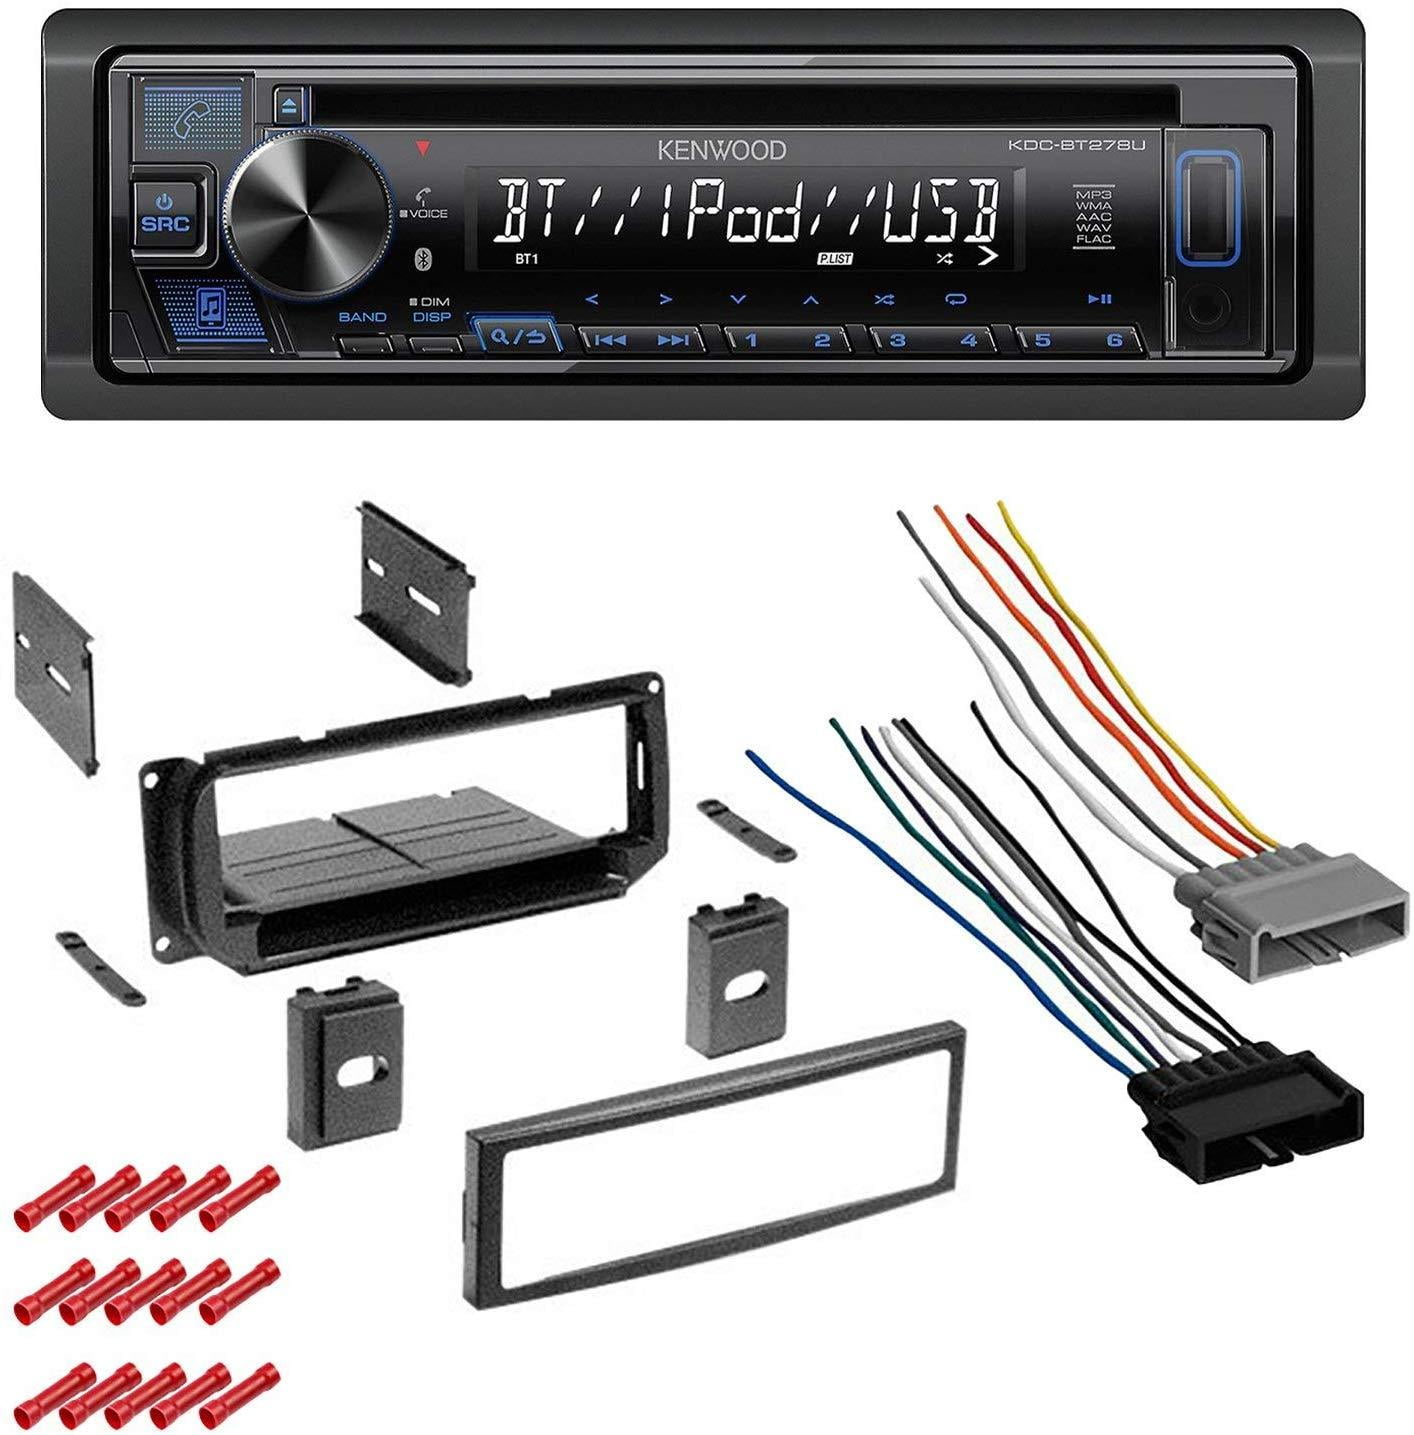 KIT8042 Kenwood Car Stereo with Bluetooth for 2001